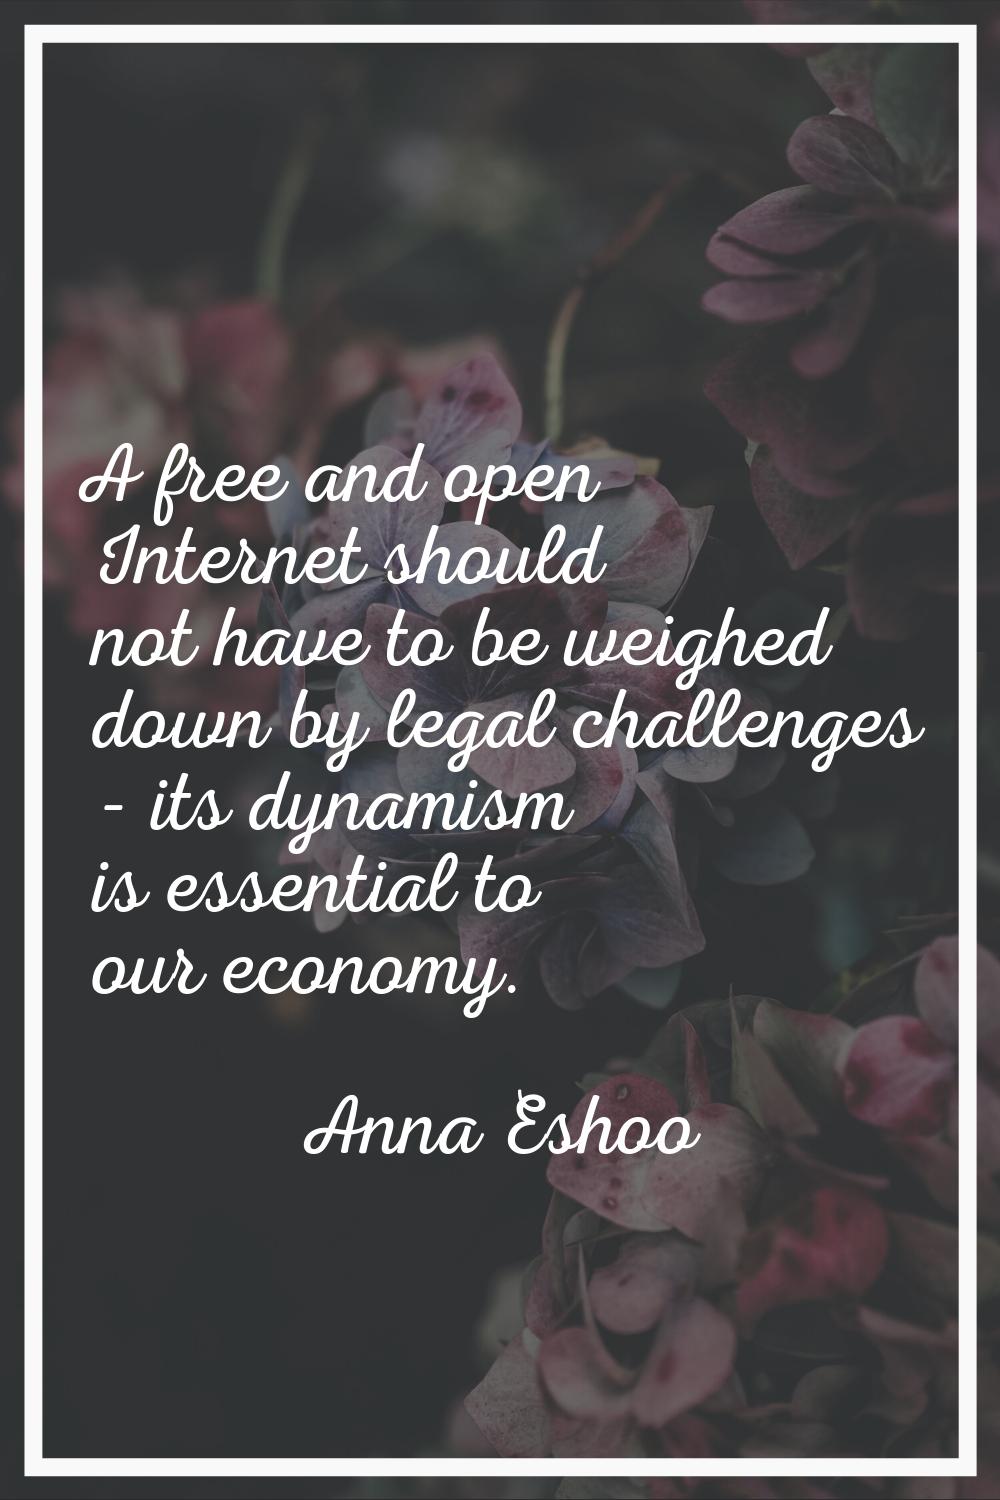 A free and open Internet should not have to be weighed down by legal challenges - its dynamism is e